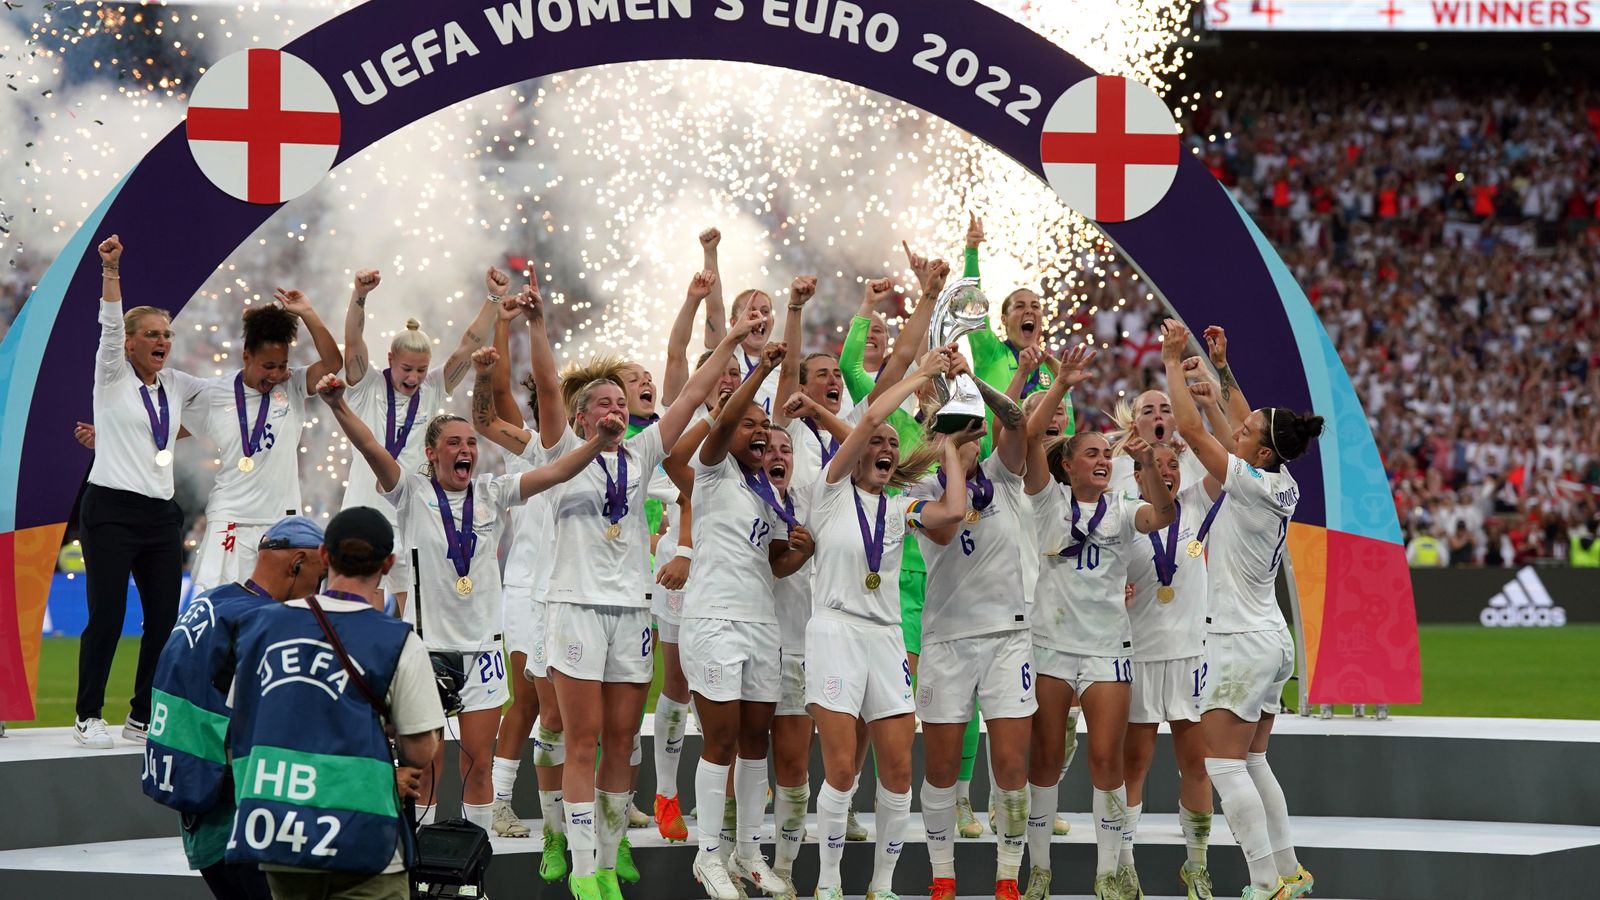 Women’s Euro 2025 schedule, teams, venues: All you need to know about next summer’s tournament in Switzerland